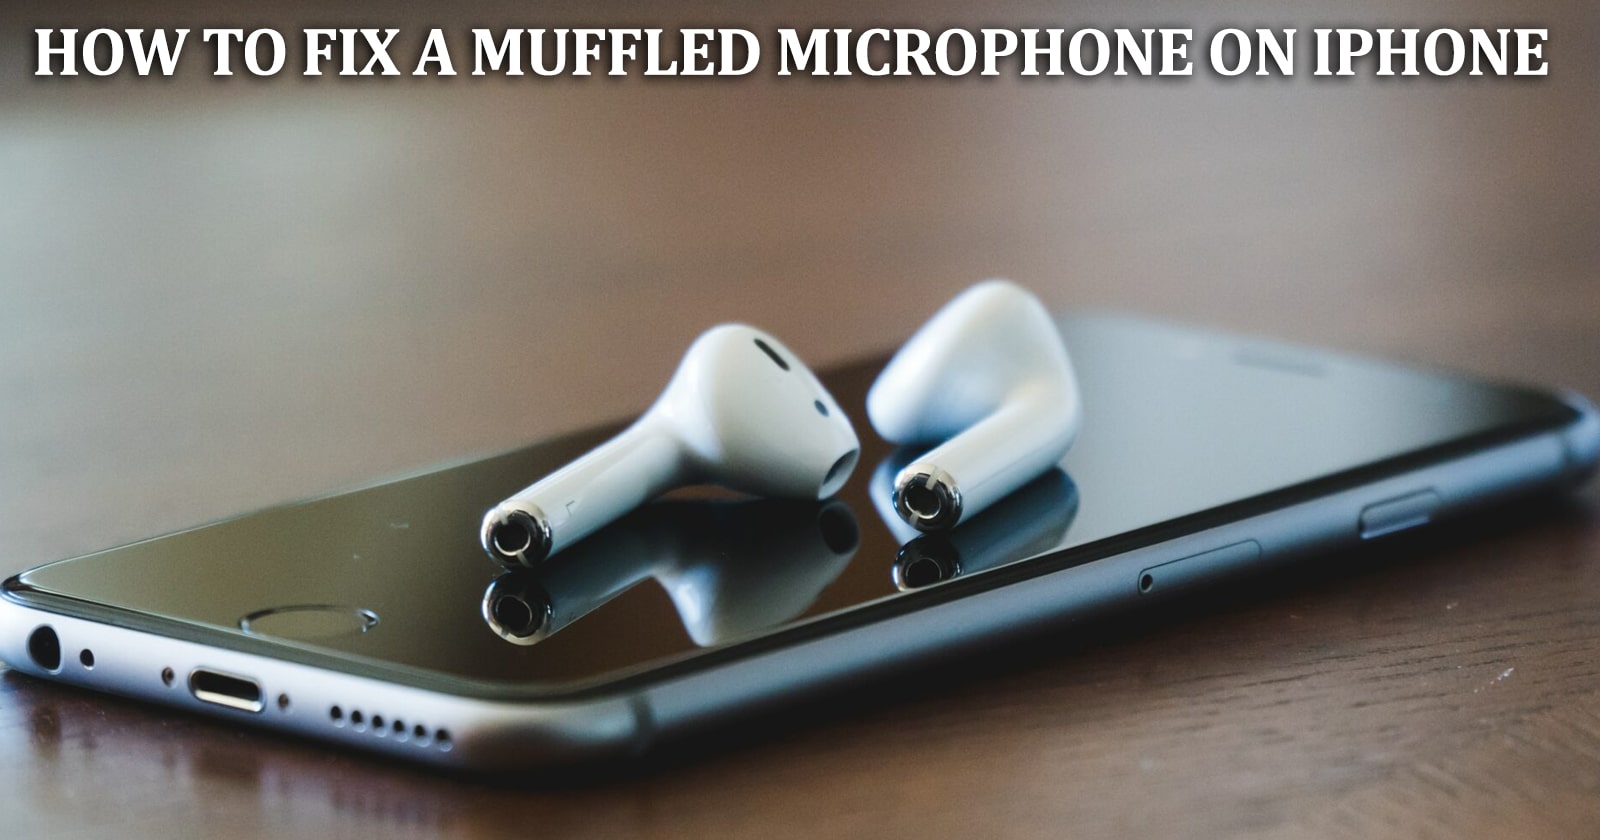 How to Fix a Muffled Microphone on iPhone